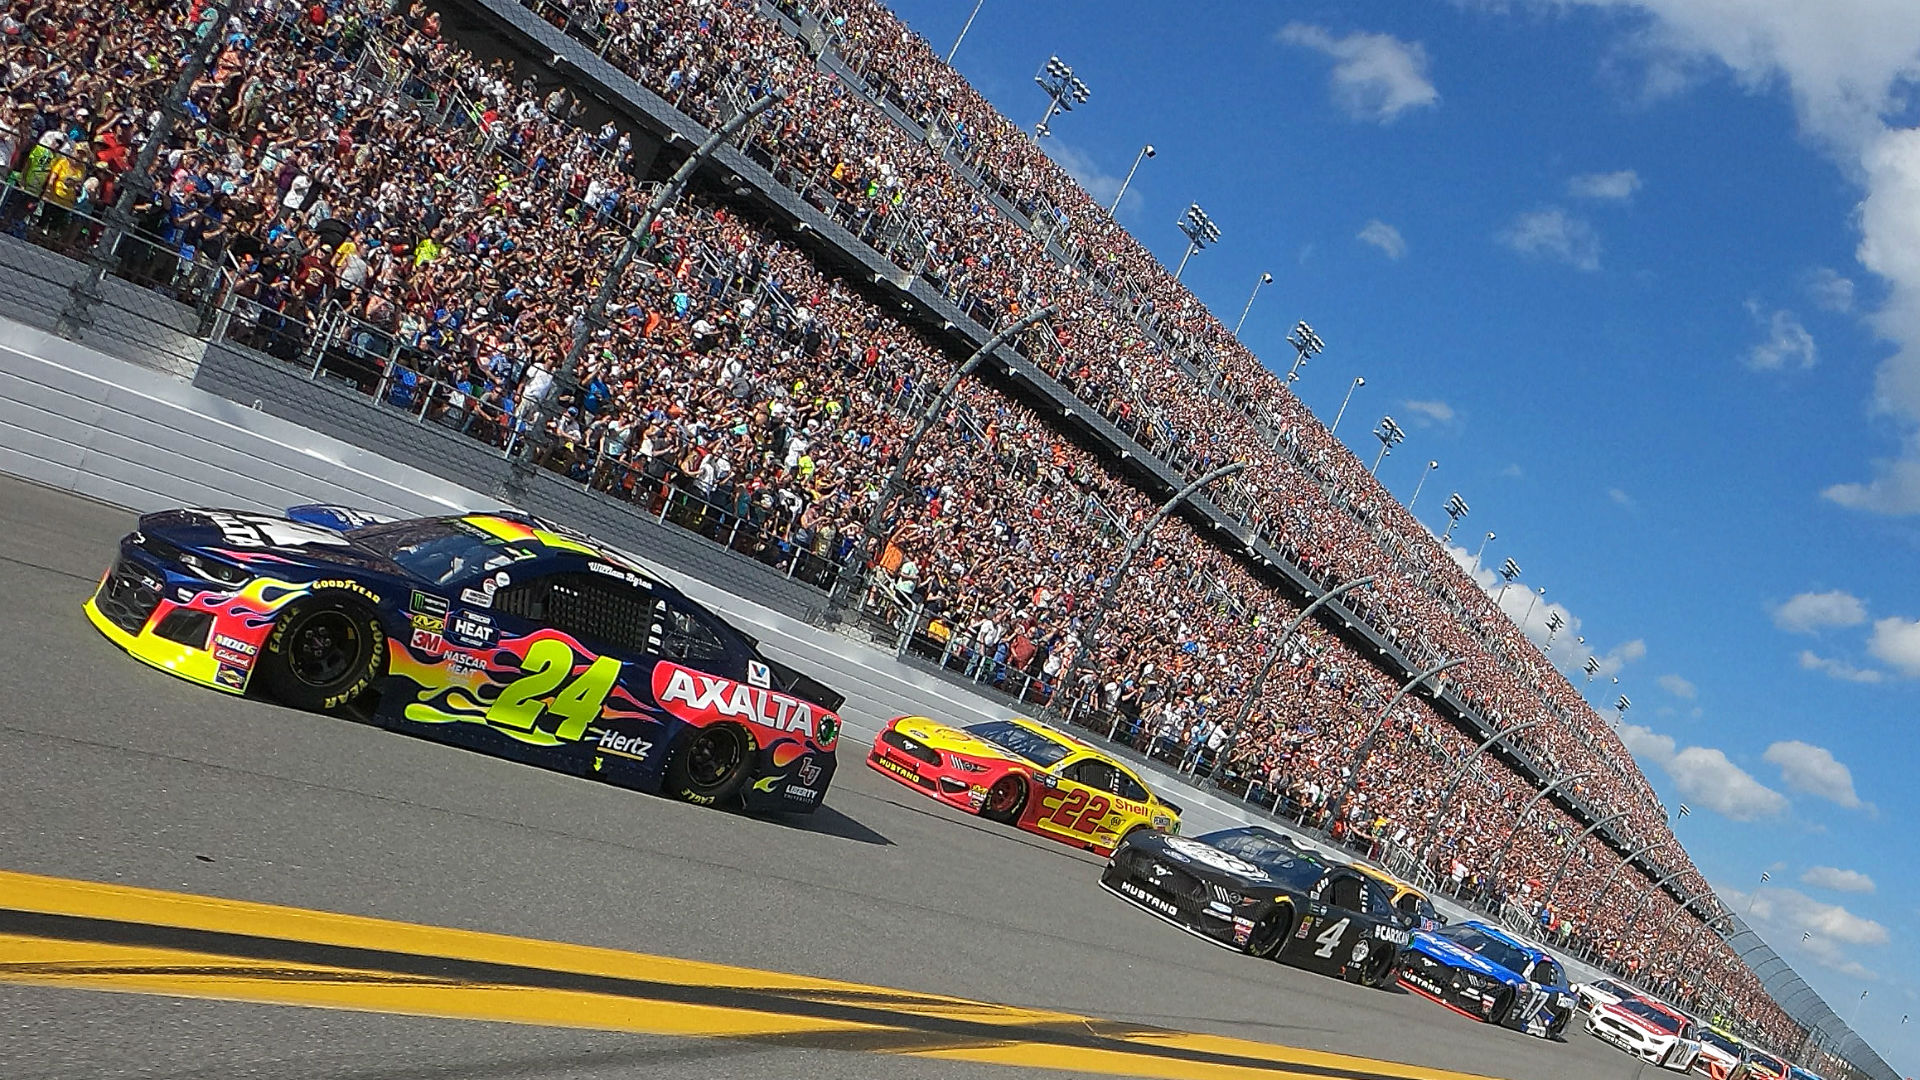 Daytona 500 2019: 'Big One' destroys many front runners with 10 laps remaining